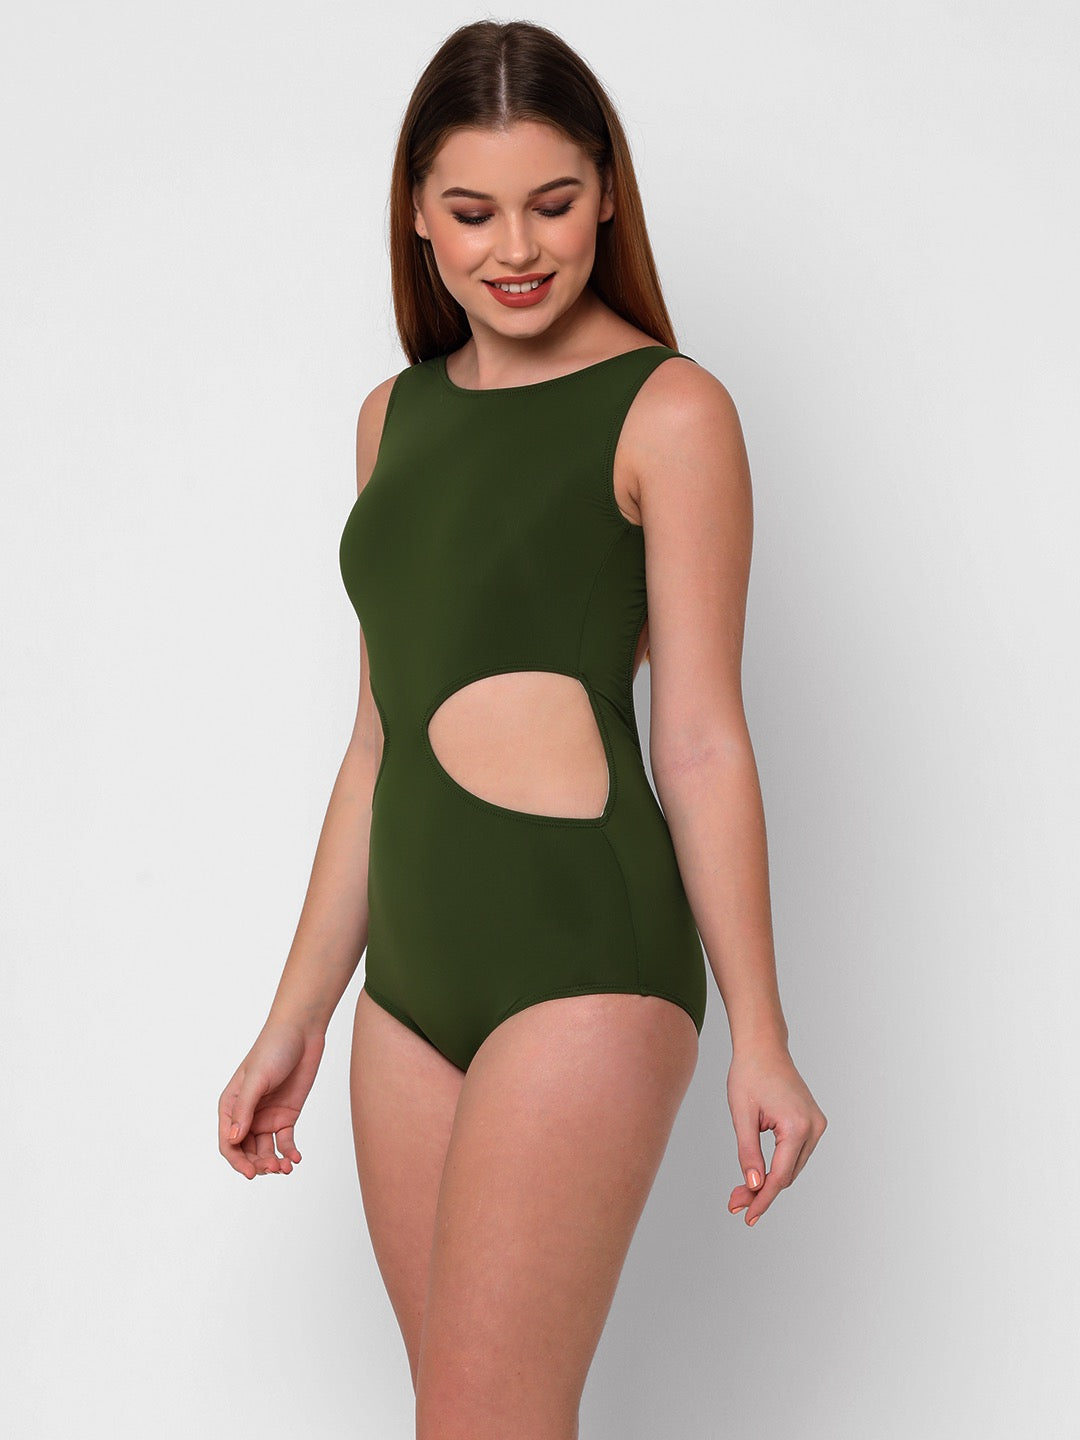 solid olive green cut out one piece swimsuit for women